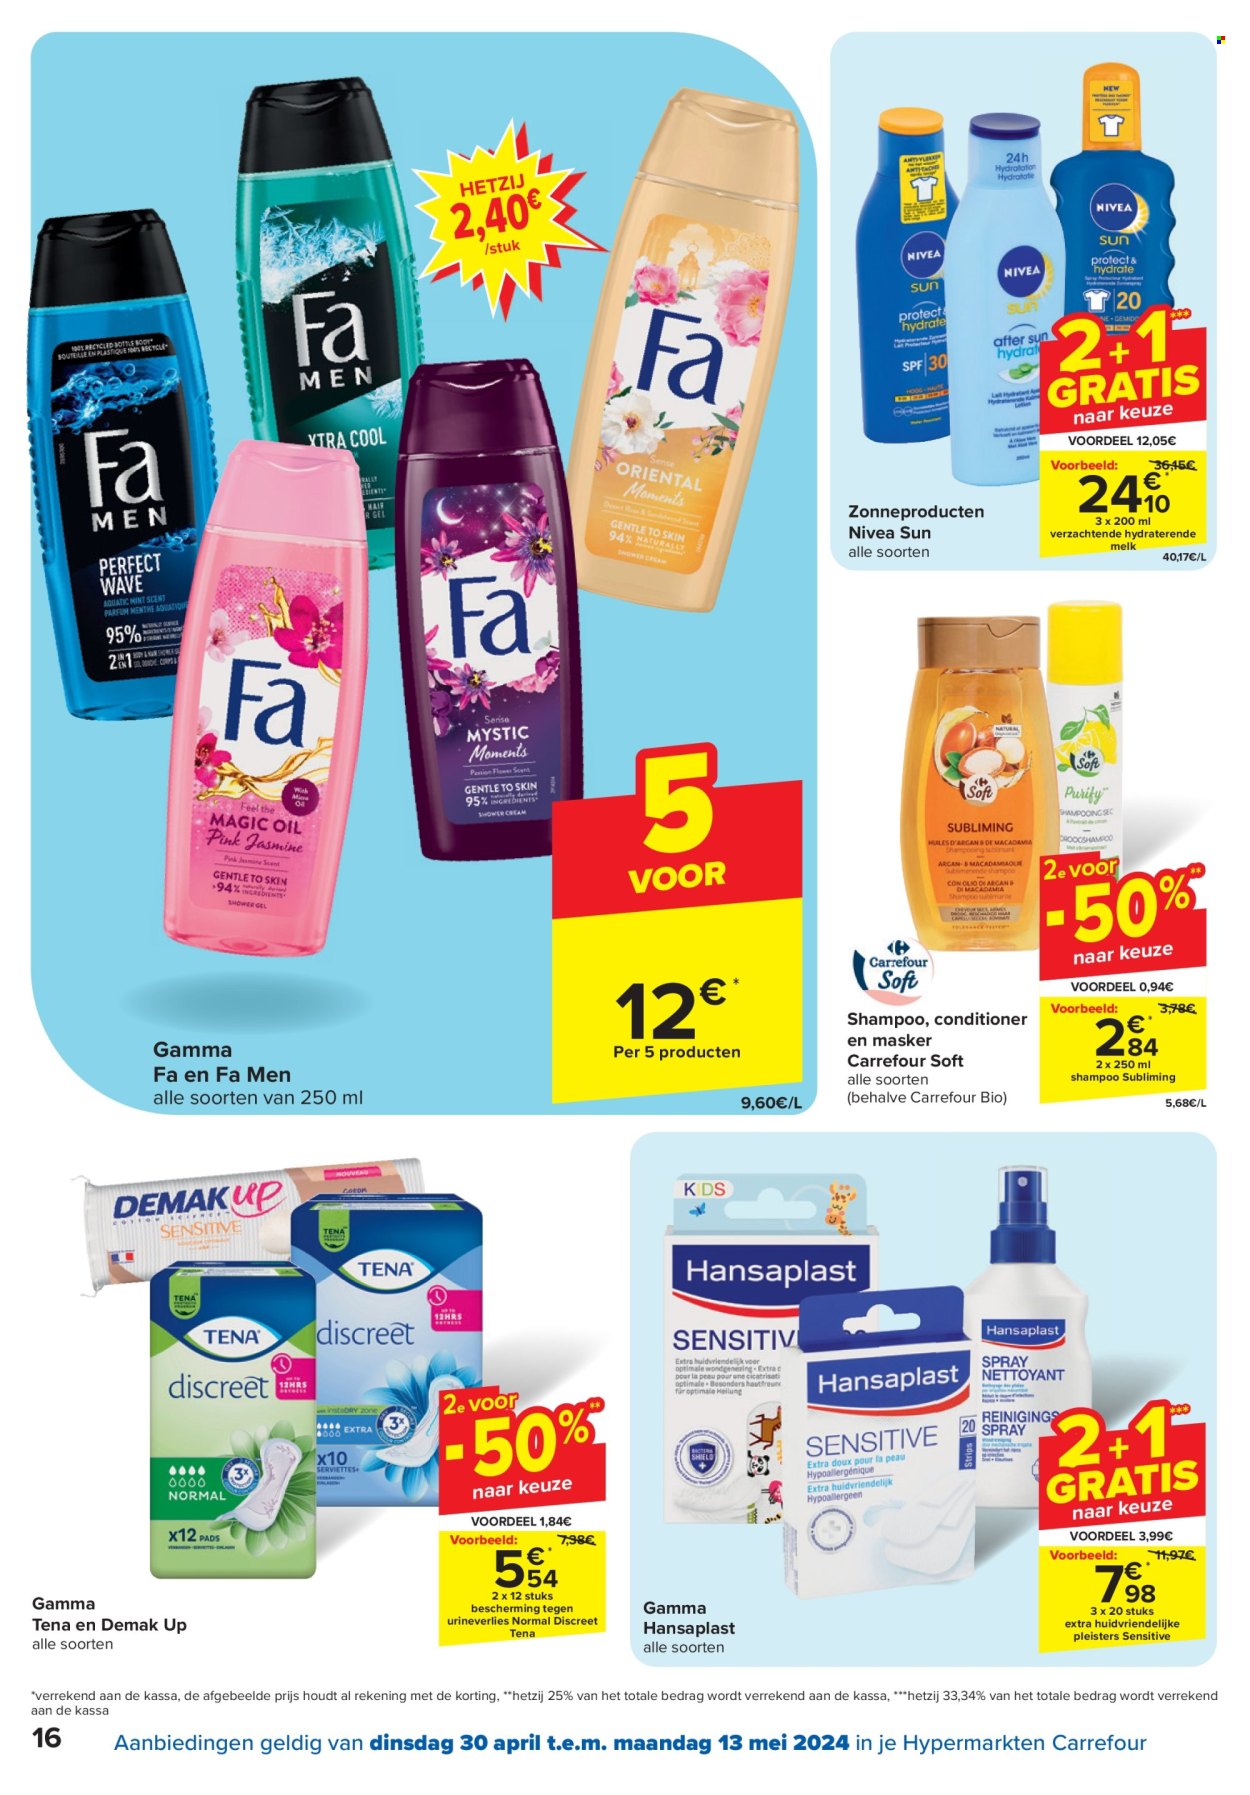 Catalogue Carrefour hypermarkt - 30.4.2024 - 13.5.2024. Page 16.